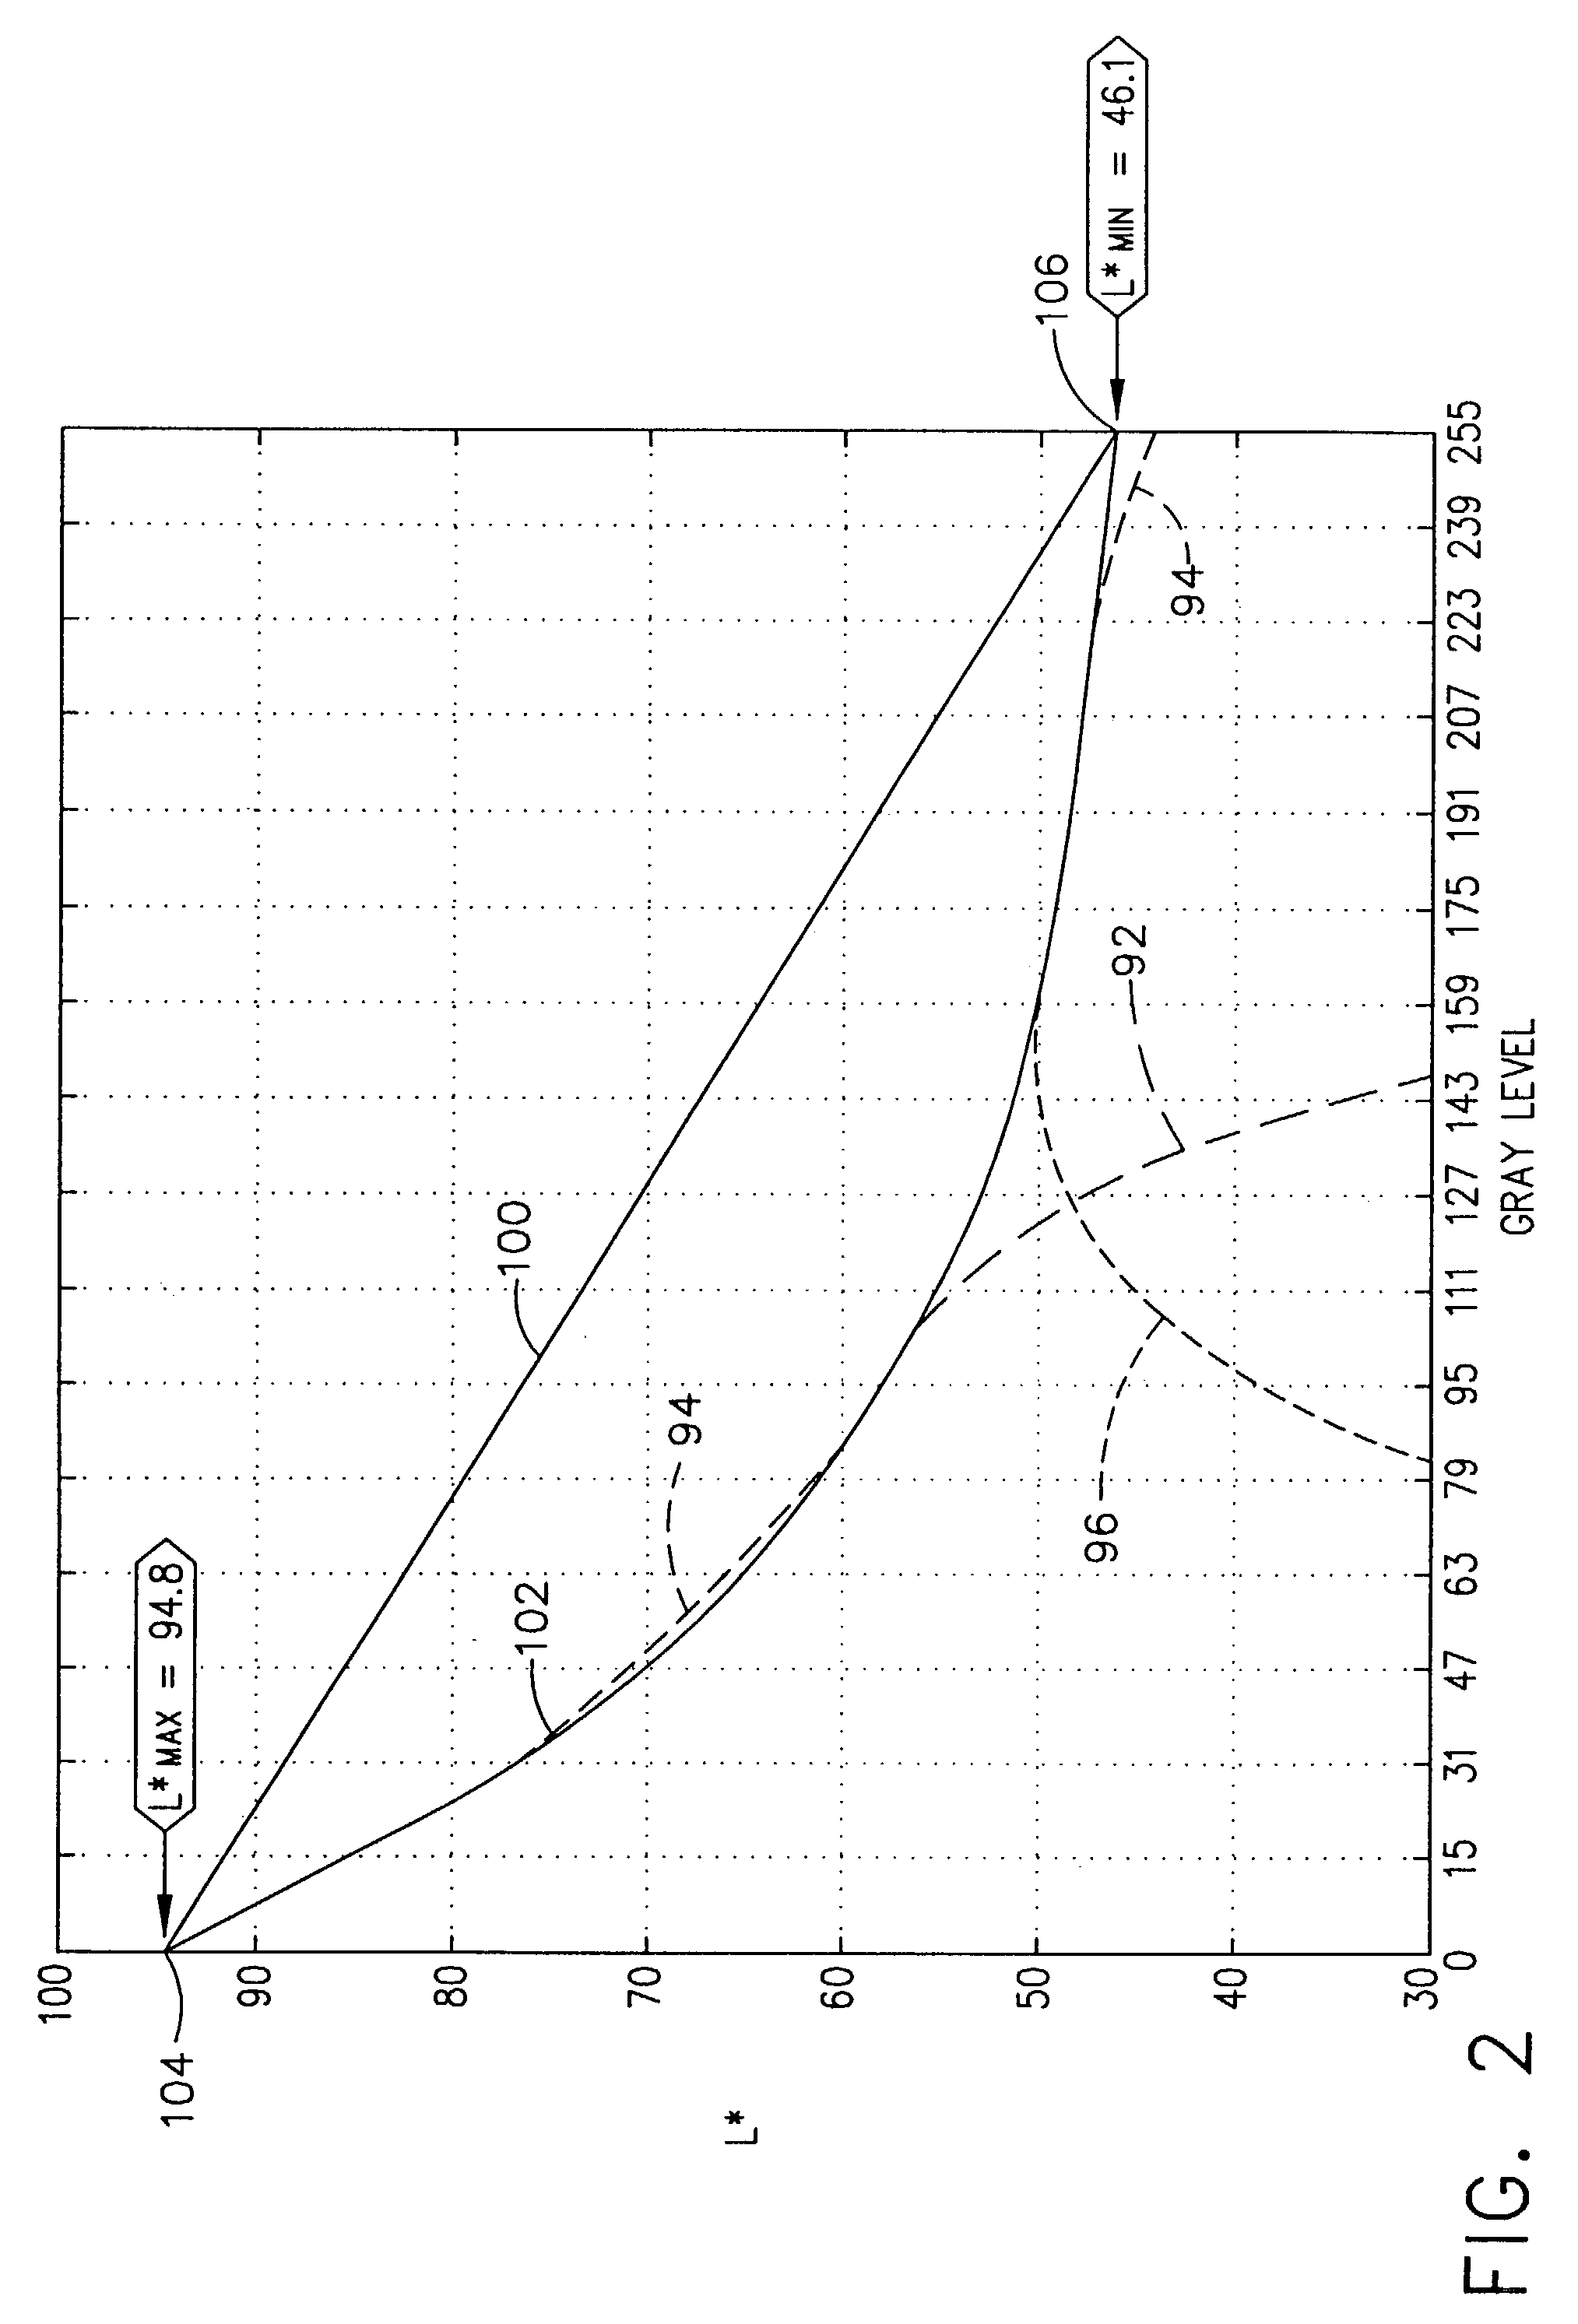 Method for correcting unadjusted threshold arrays for halftoning by use of parameterized transfer functions that generate adjusted threshold arrays at run time